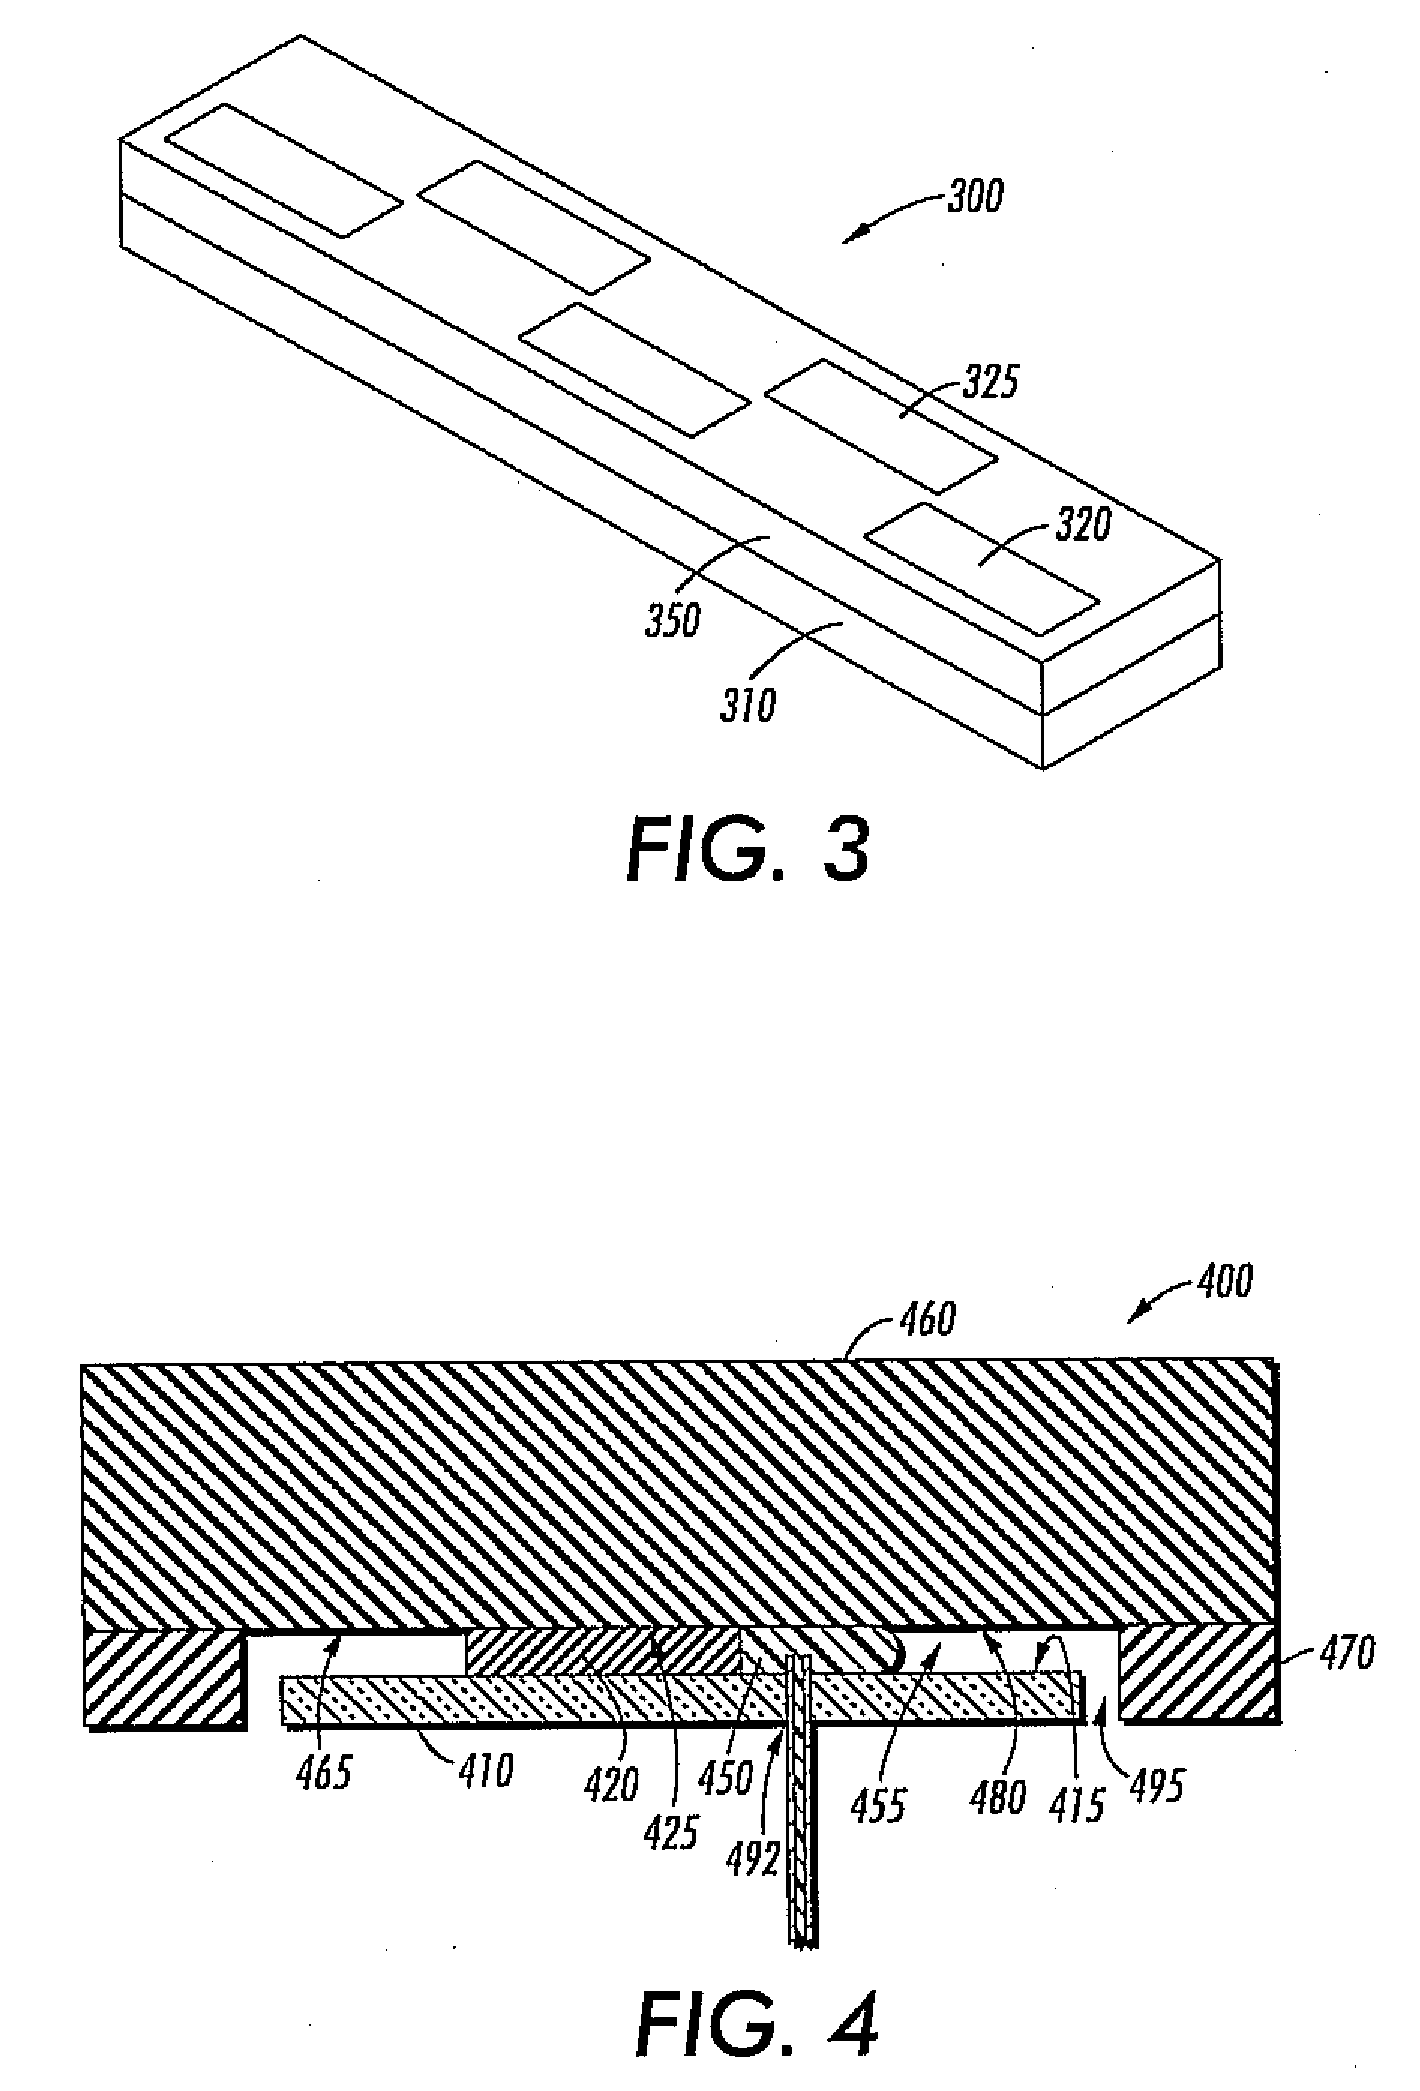 Maintainable Coplanar Front Face for Silicon Die Array Printhead